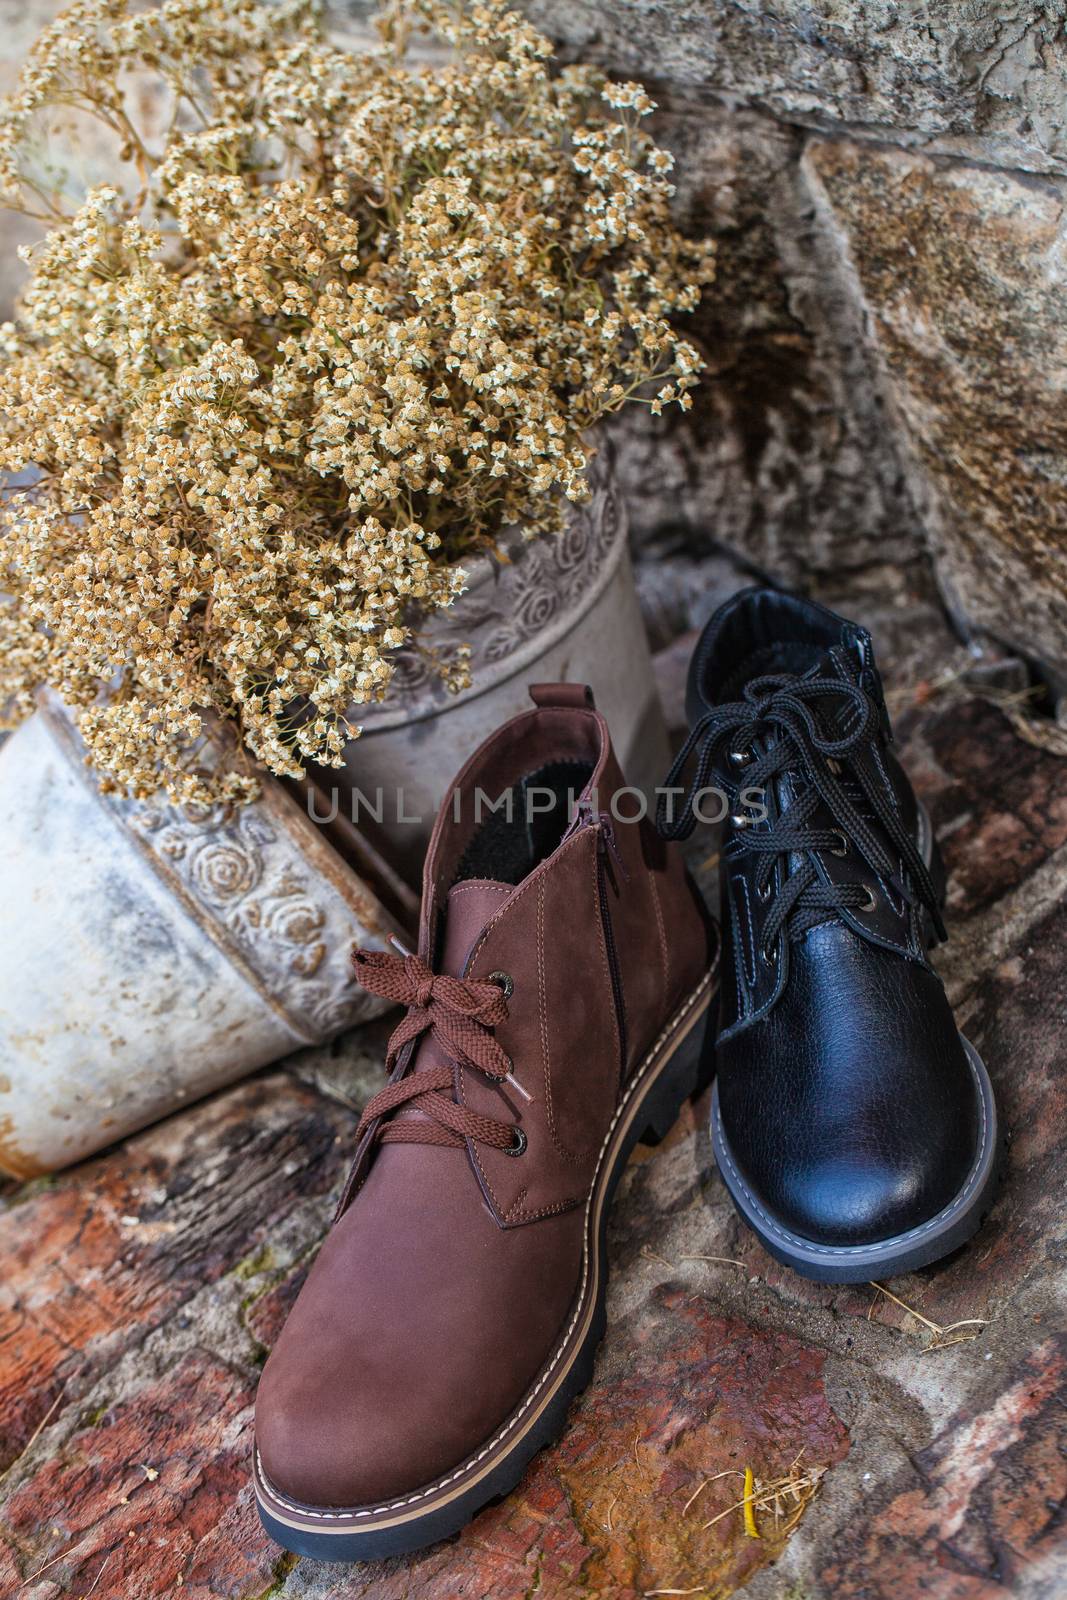 Different kinds of shoes on a natural background